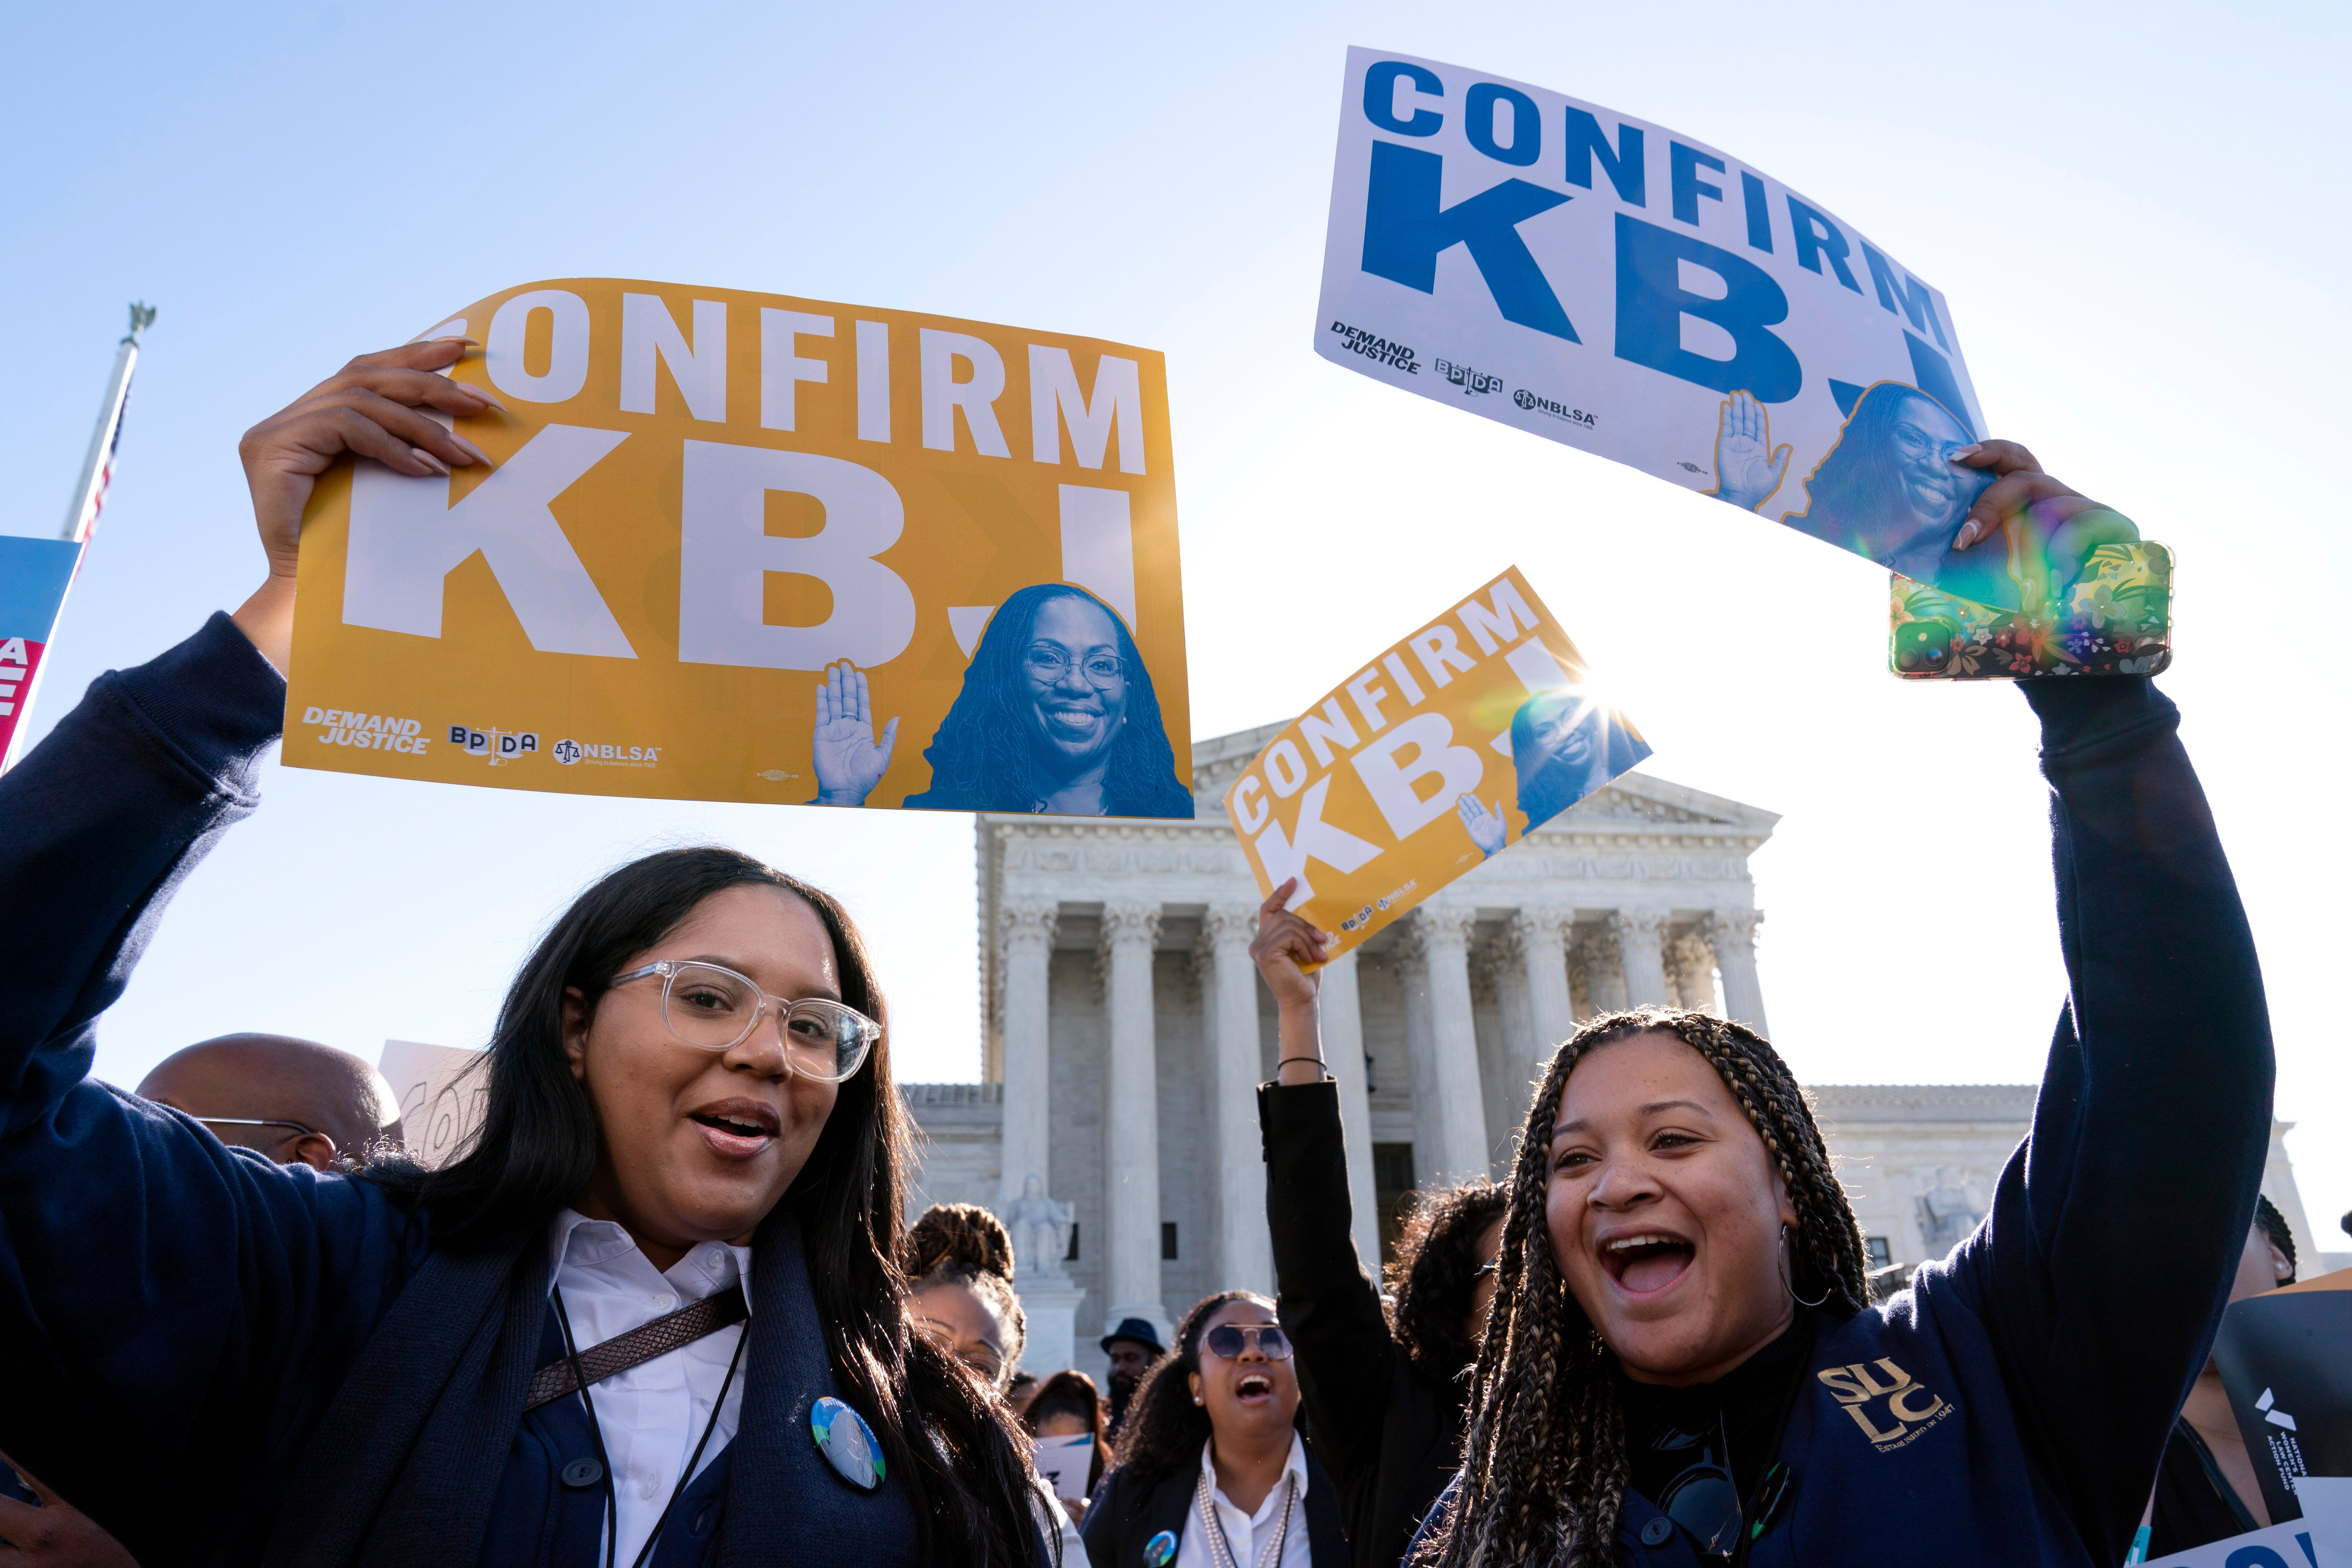 Supporters of Judge Ketanji Brown Jackson rally outside of the Supreme Court on Capitol Hill in Washington on Monday as the Senate Judiciary Committee begins historic confirmation hearings